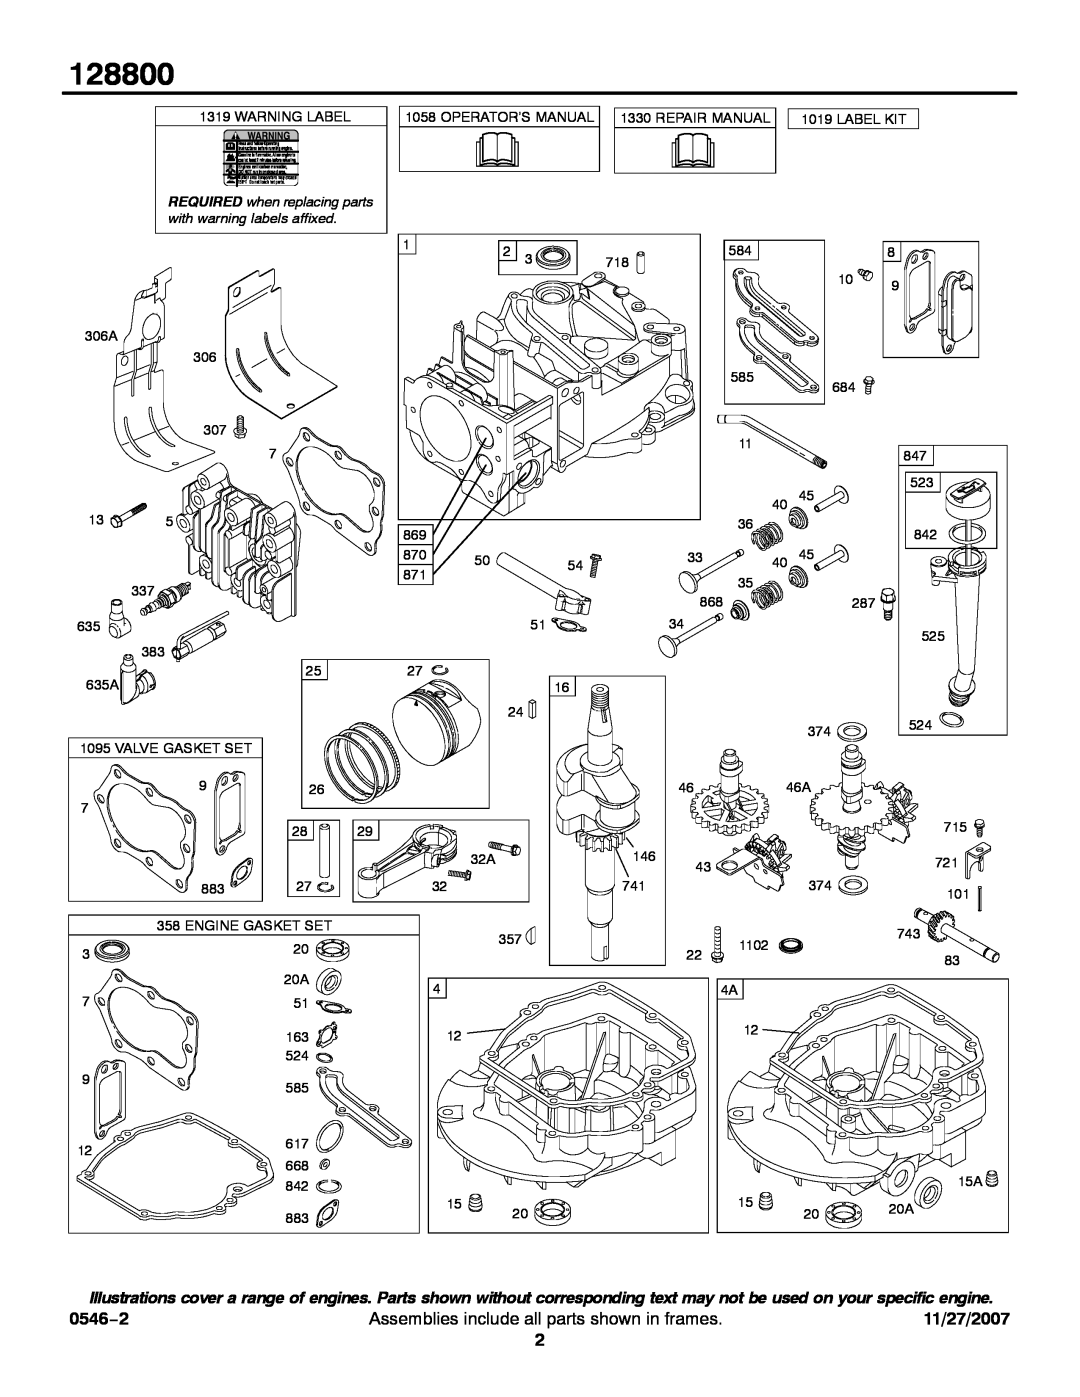 Briggs & Stratton 128800 service manual 0546−2, Assemblies include all parts shown in frames, 11/27/2007 